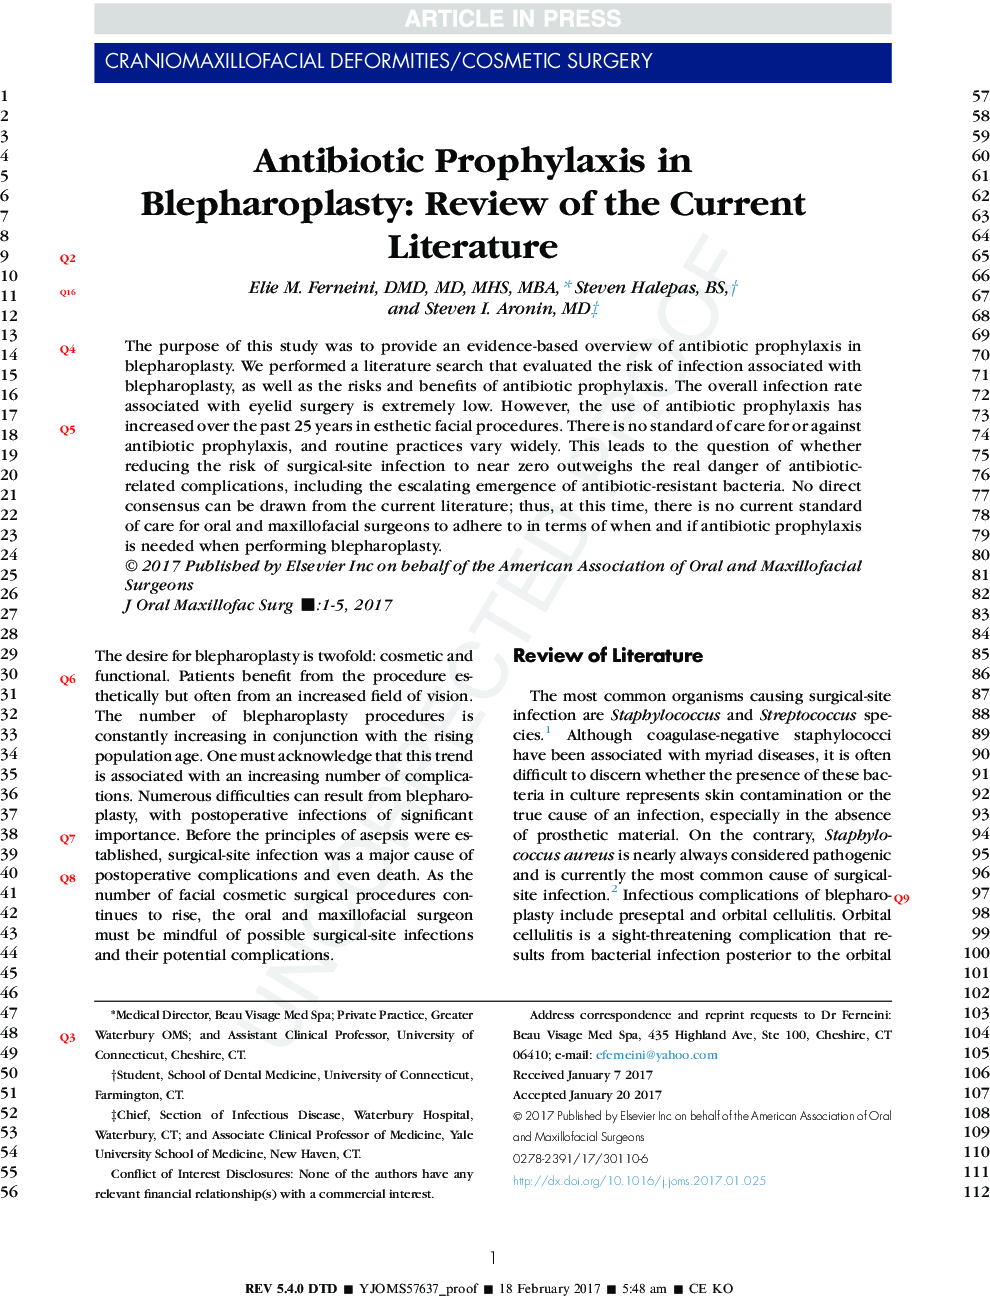 Antibiotic Prophylaxis in Blepharoplasty: Review of the Current Literature